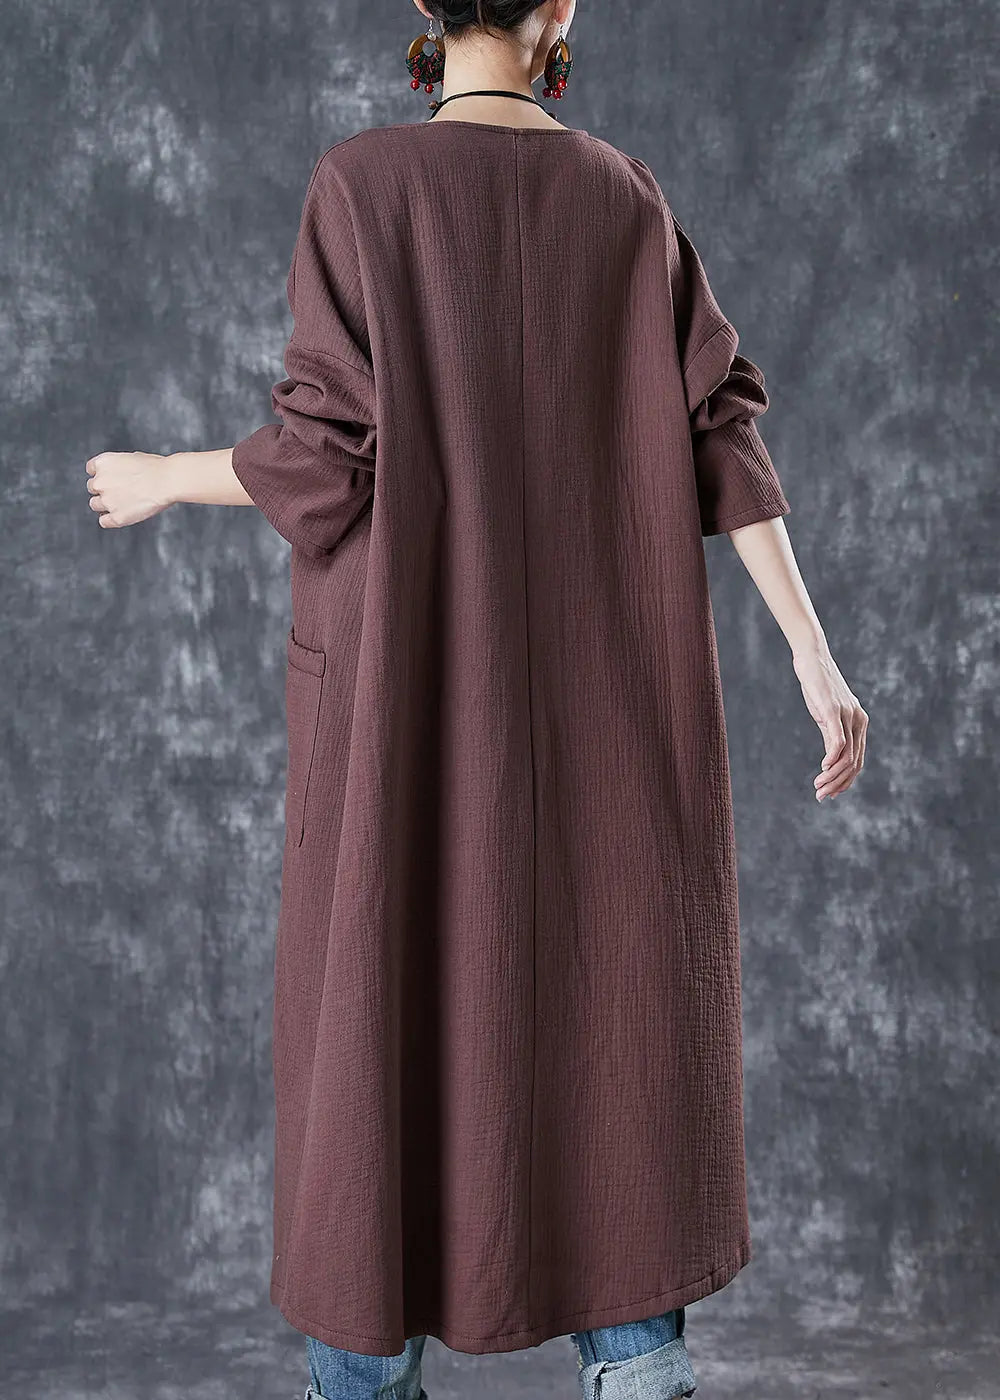 Classy Chocolate Oversized Chinese Button Linen Long Cardigan Spring Ada Fashion